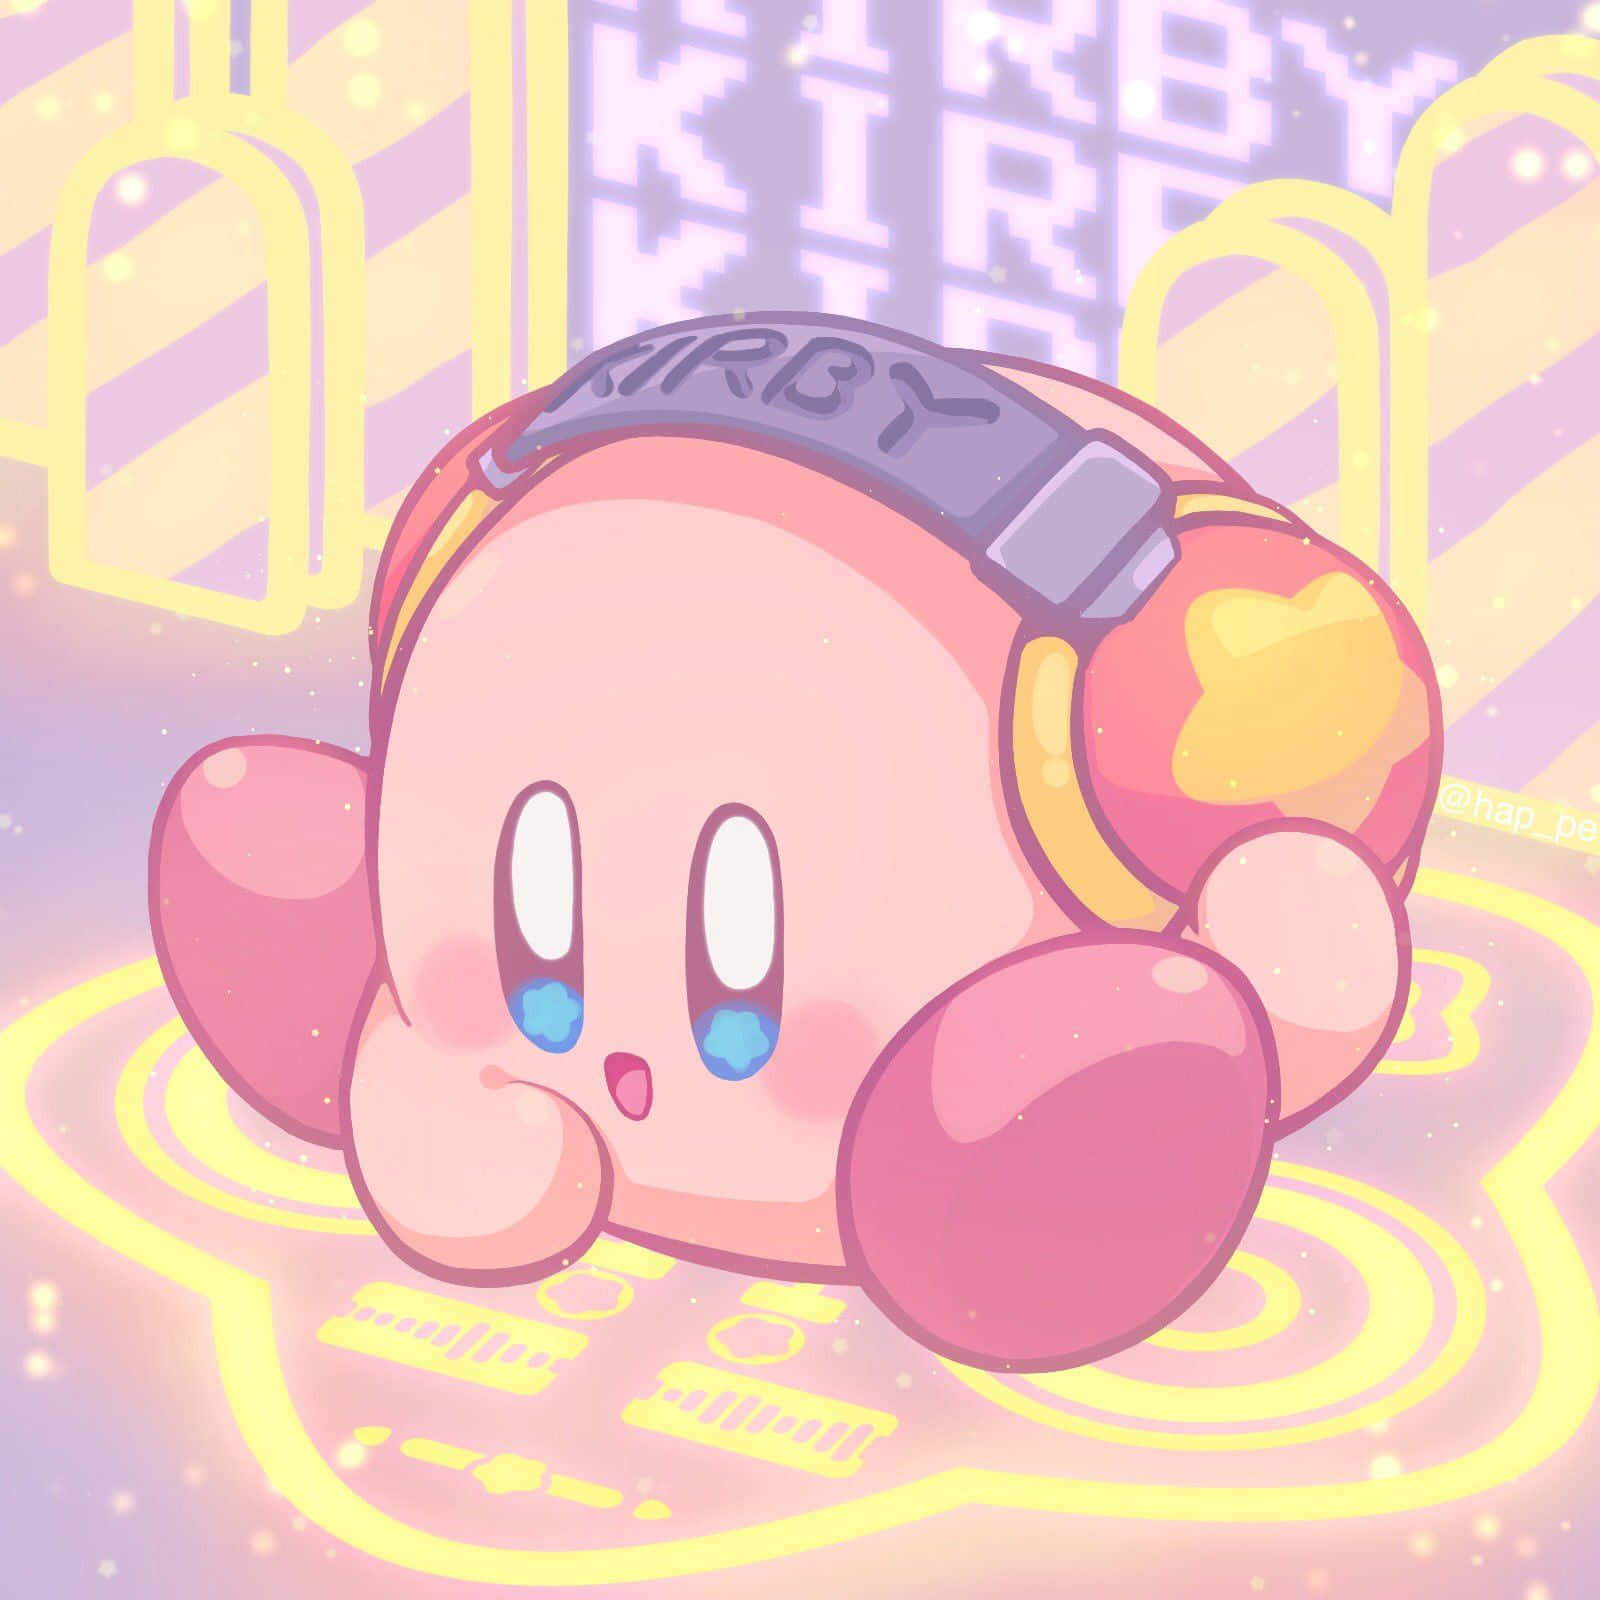 Have a fun time with Kirby, the lovable pink creature